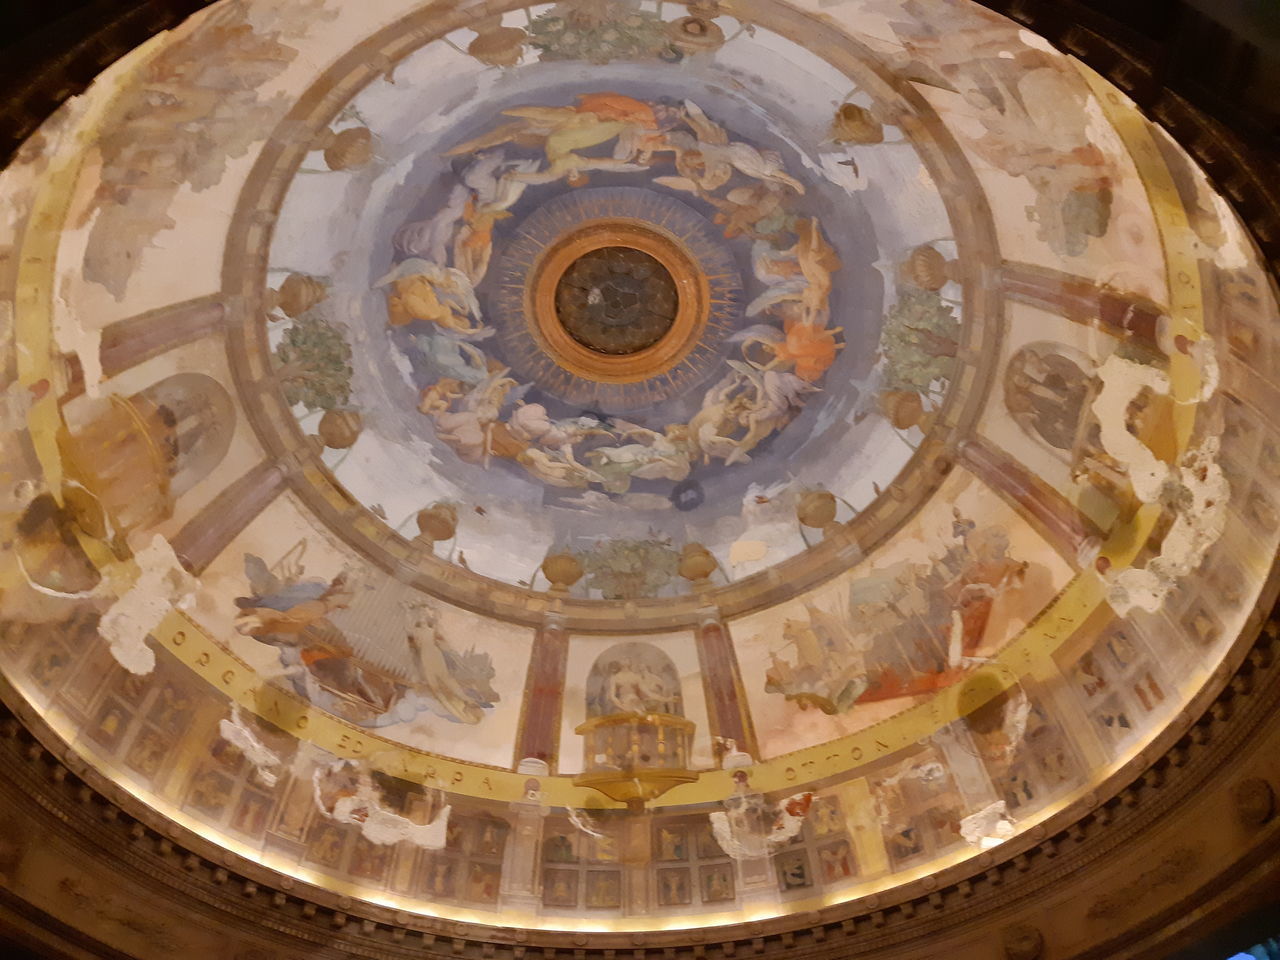 LOW ANGLE VIEW OF DOME OF CEILING